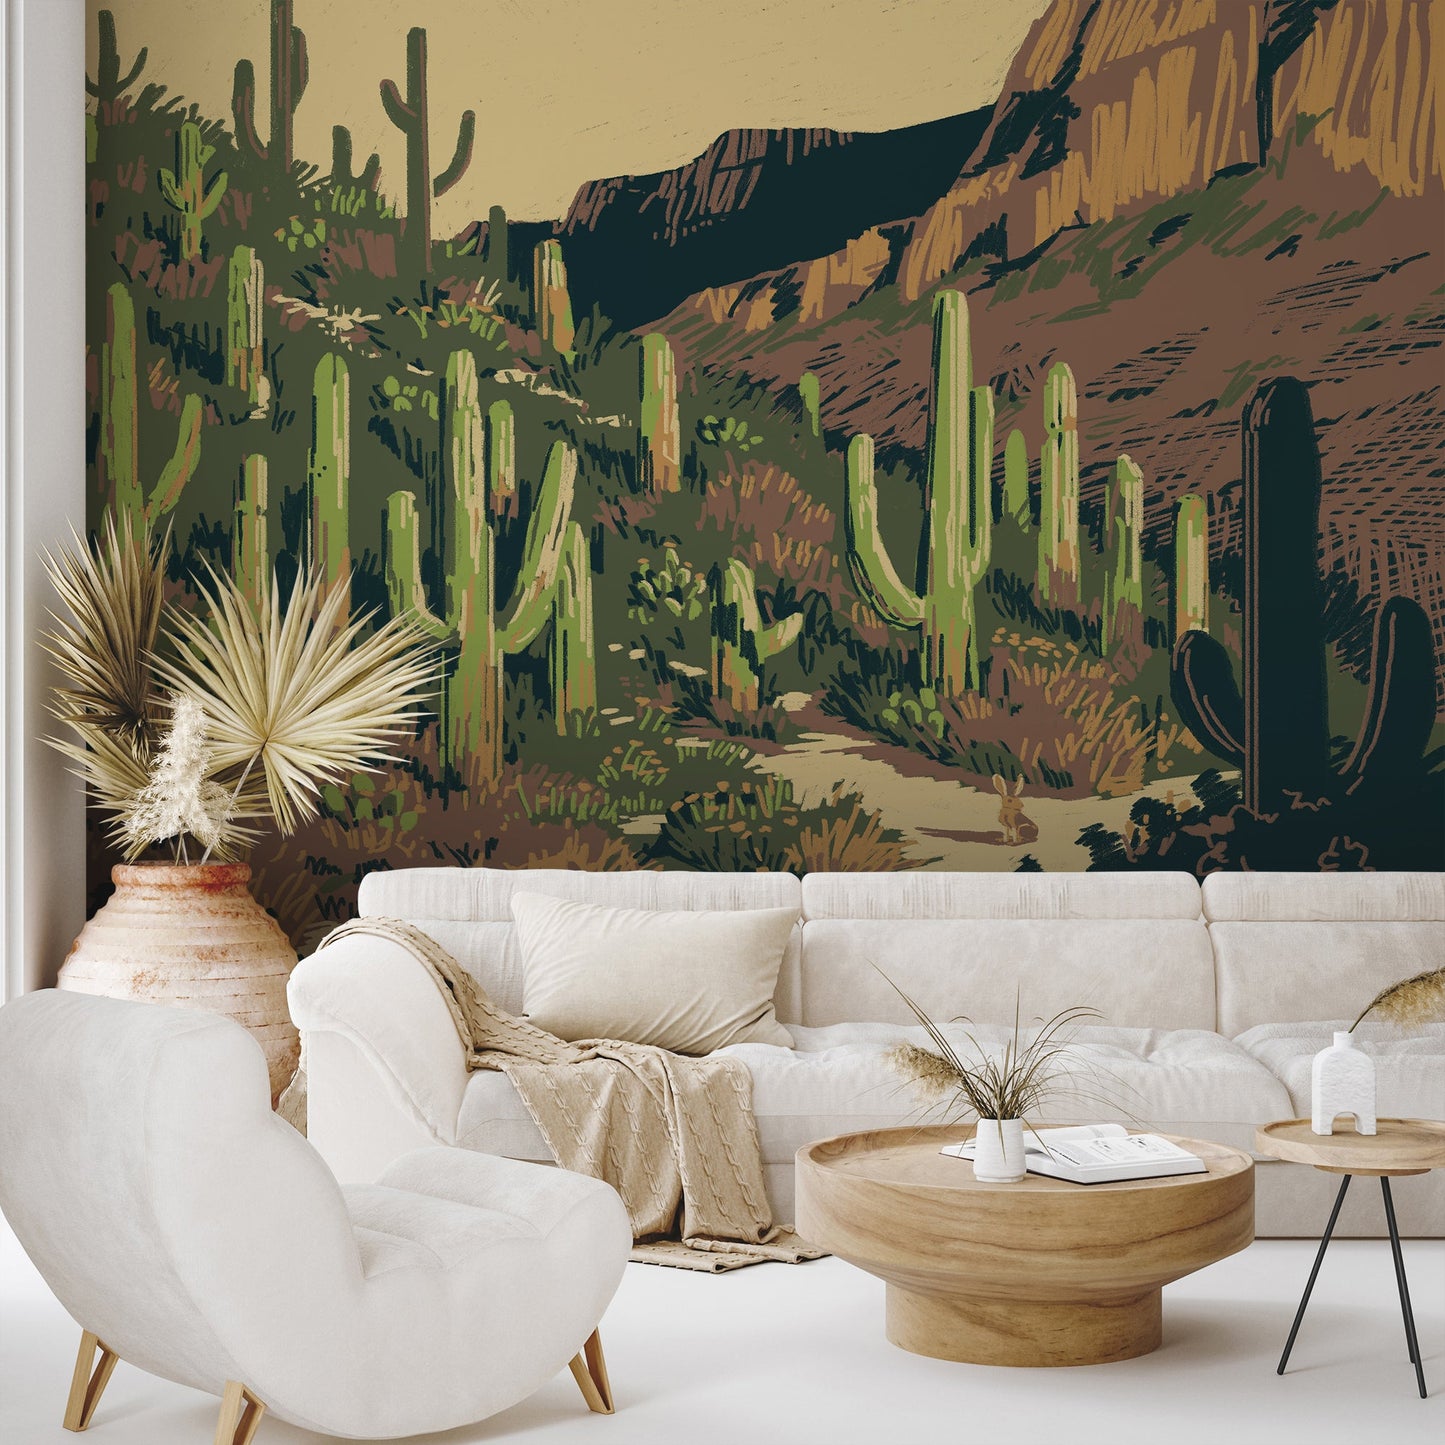 Peel & Stick Wall Mural - Saguaro National Park By Anderson Design Group